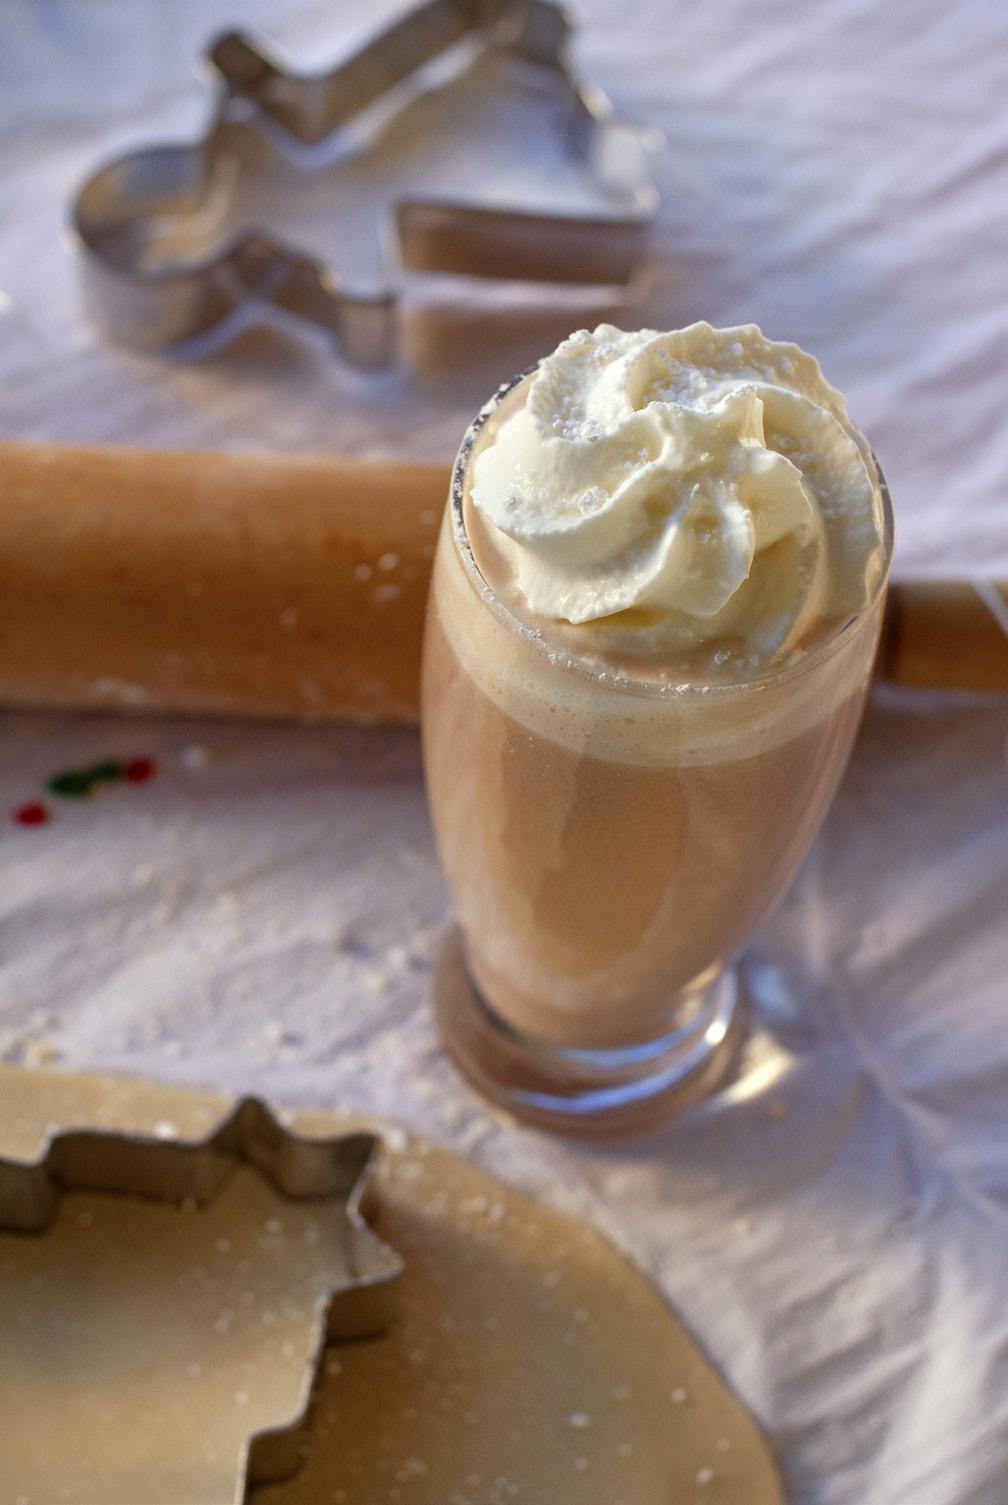 Mexican Wedding Cookie Holidays always remind me of baking Mexican Wedding Cookies with my grandma. I created this drink to bring me back to my grandma s kitchen rolling hot cookies in powdered sugar.